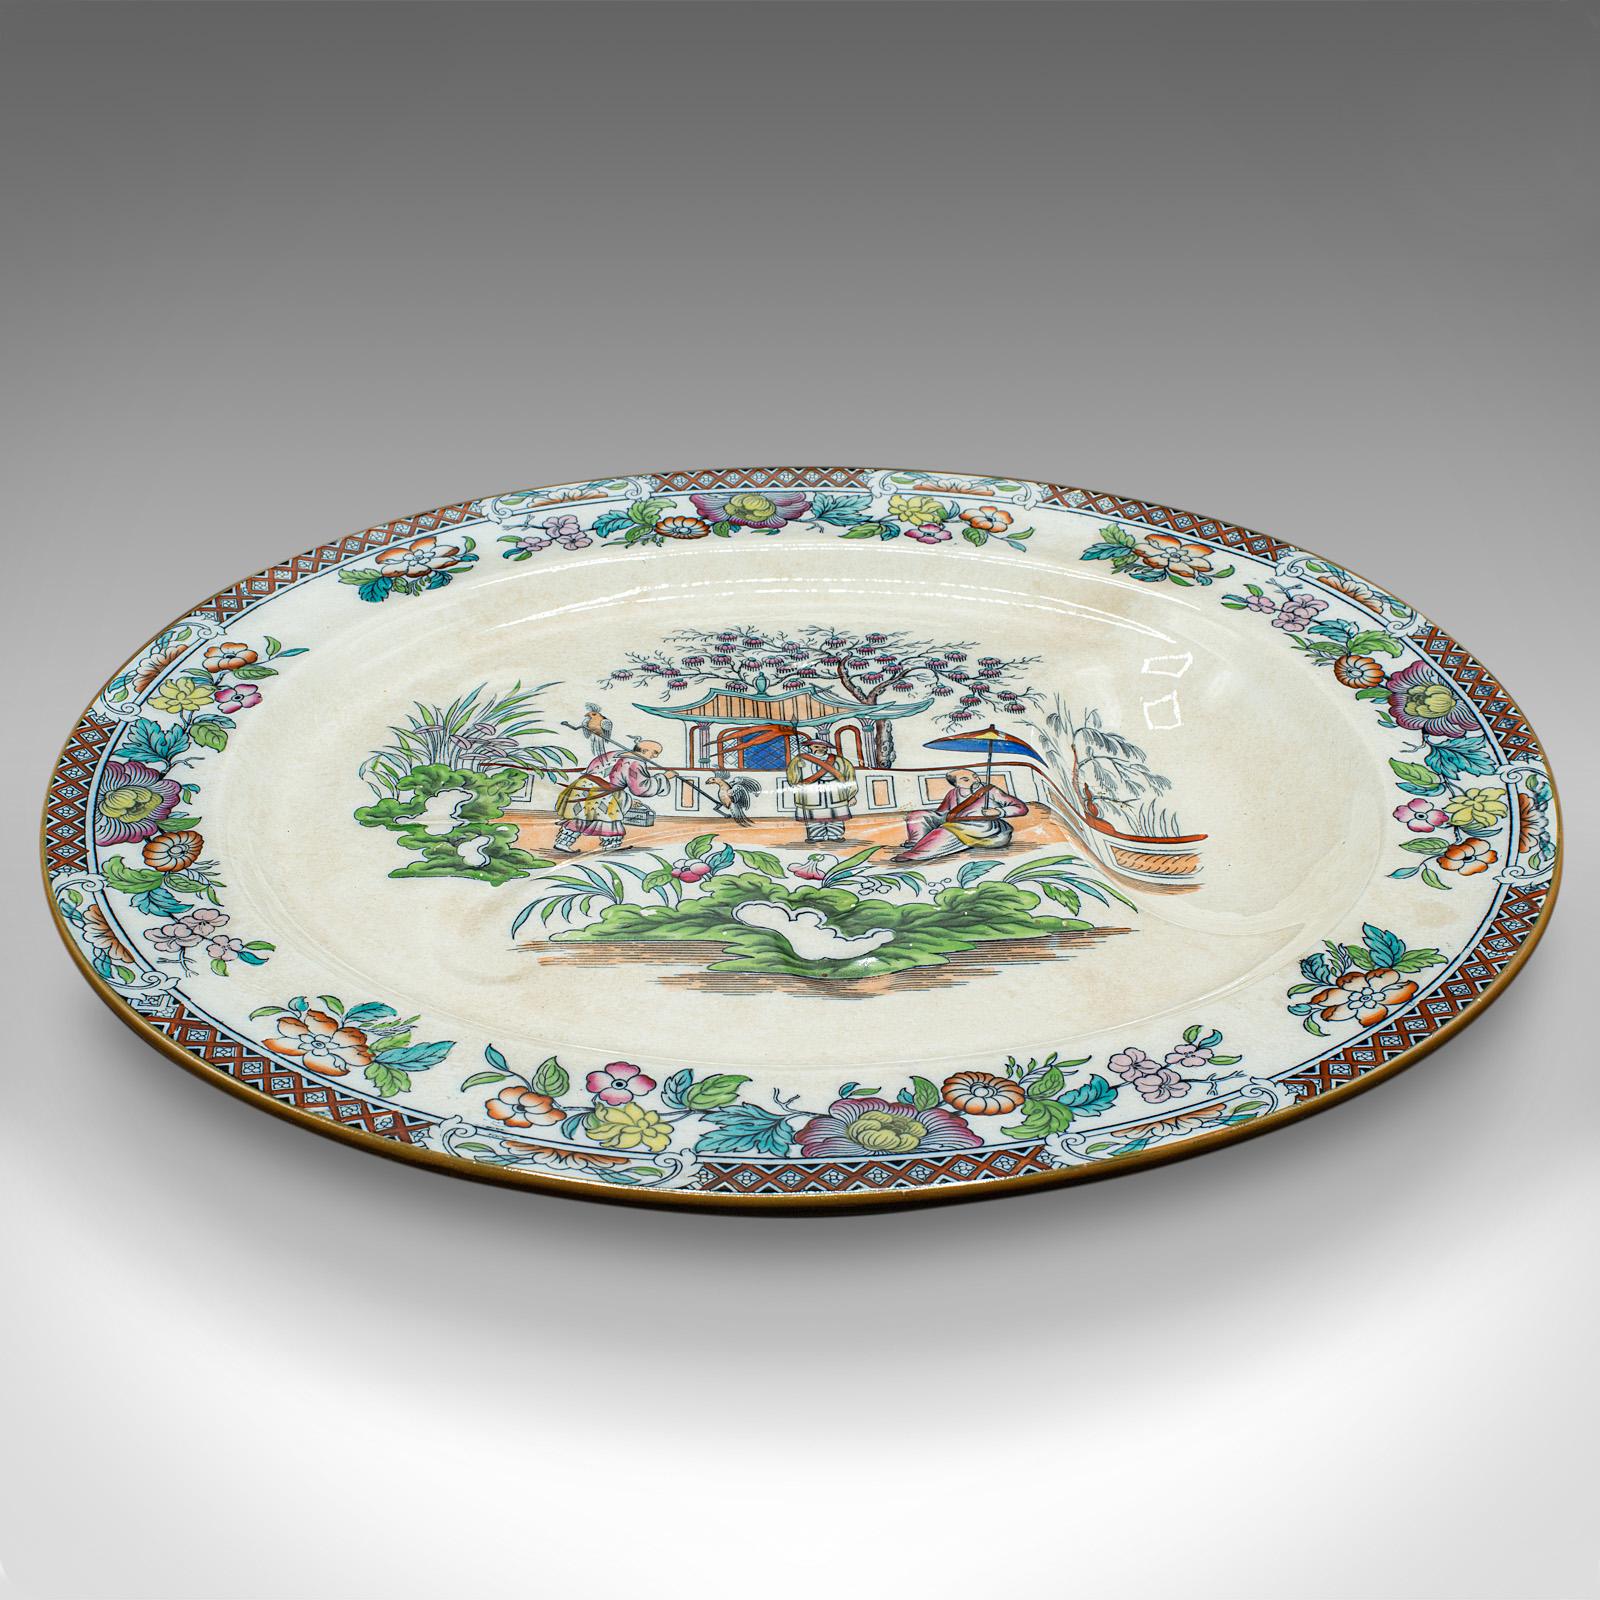 This is a large antique oval meat platter. A Chinese, ceramic dinner serving plate, dating to the late Victorian period, circa 1900.

Highly decorative serving plate of generous proportion
Displays a desirable aged patina and in good order
Cream